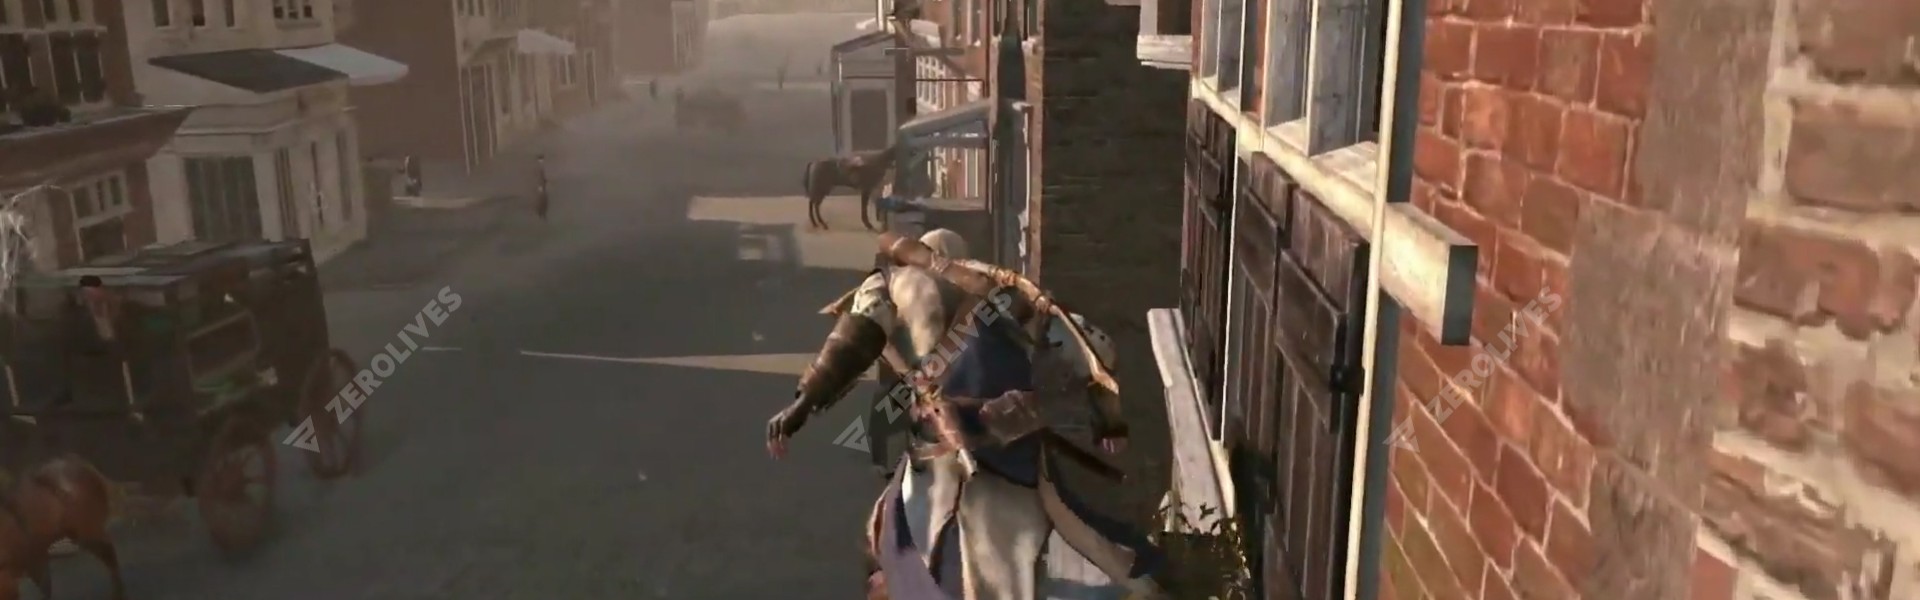 Assassin&#039;s Creed 3 Remastered